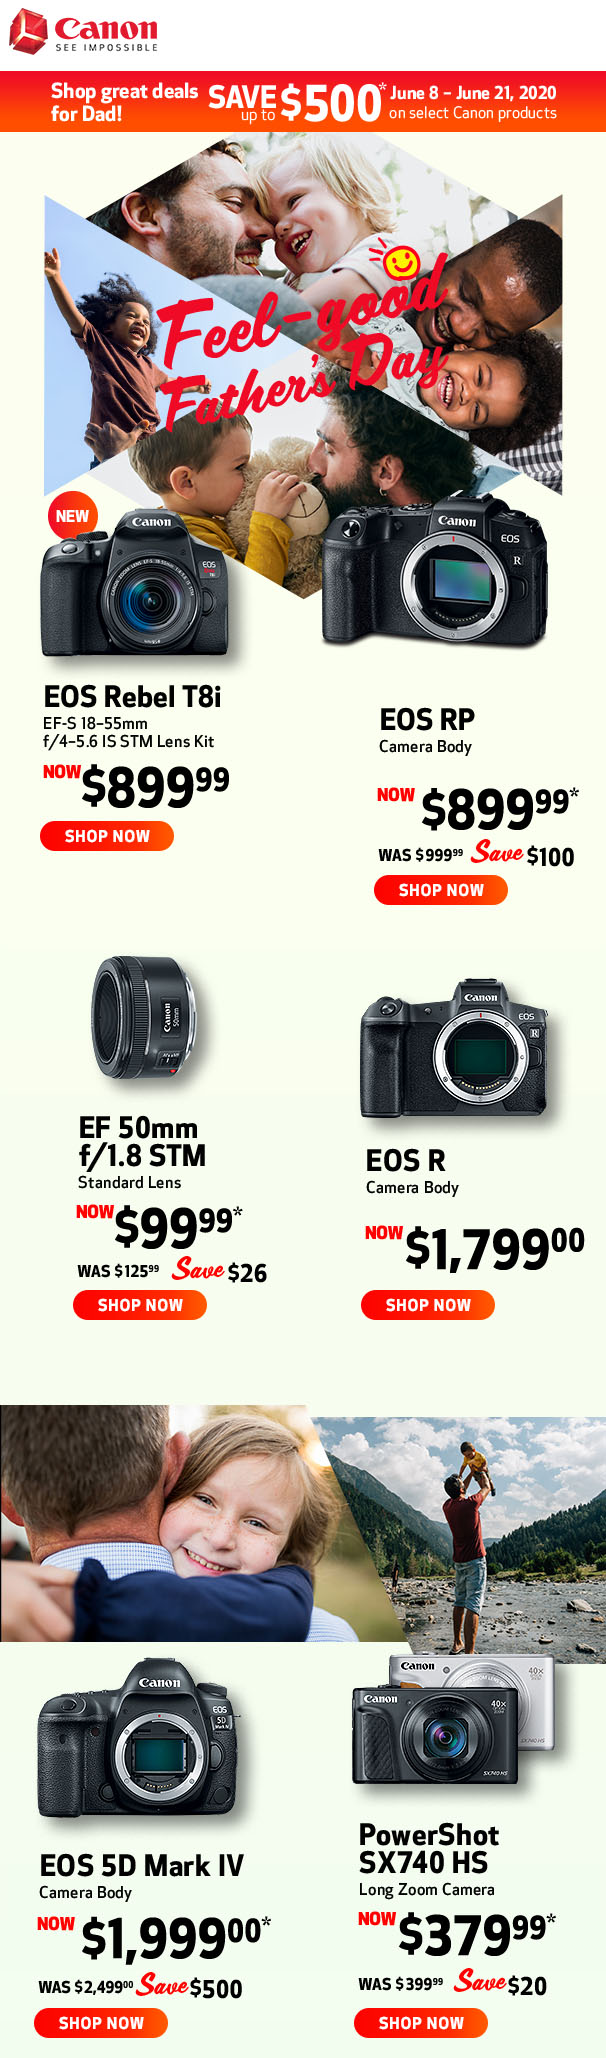 EOS Rebel T8i EF-S 18-55mm f/4-5.6 IS STM lens kit now $899.99 - EOS RP Camera Body now $899.99 was $999.99 save $100 - EF 50mm f/1.8 STM standard lens now $99.99 was $125.99 save $26 - EOS R camera bodyy now $1799.99 - EOS 5D Mark IV now $1999.00 was $2499.99 save $500 - PowerShot SX740 HS long zoom camera now $379.99 was $399.99 save $20